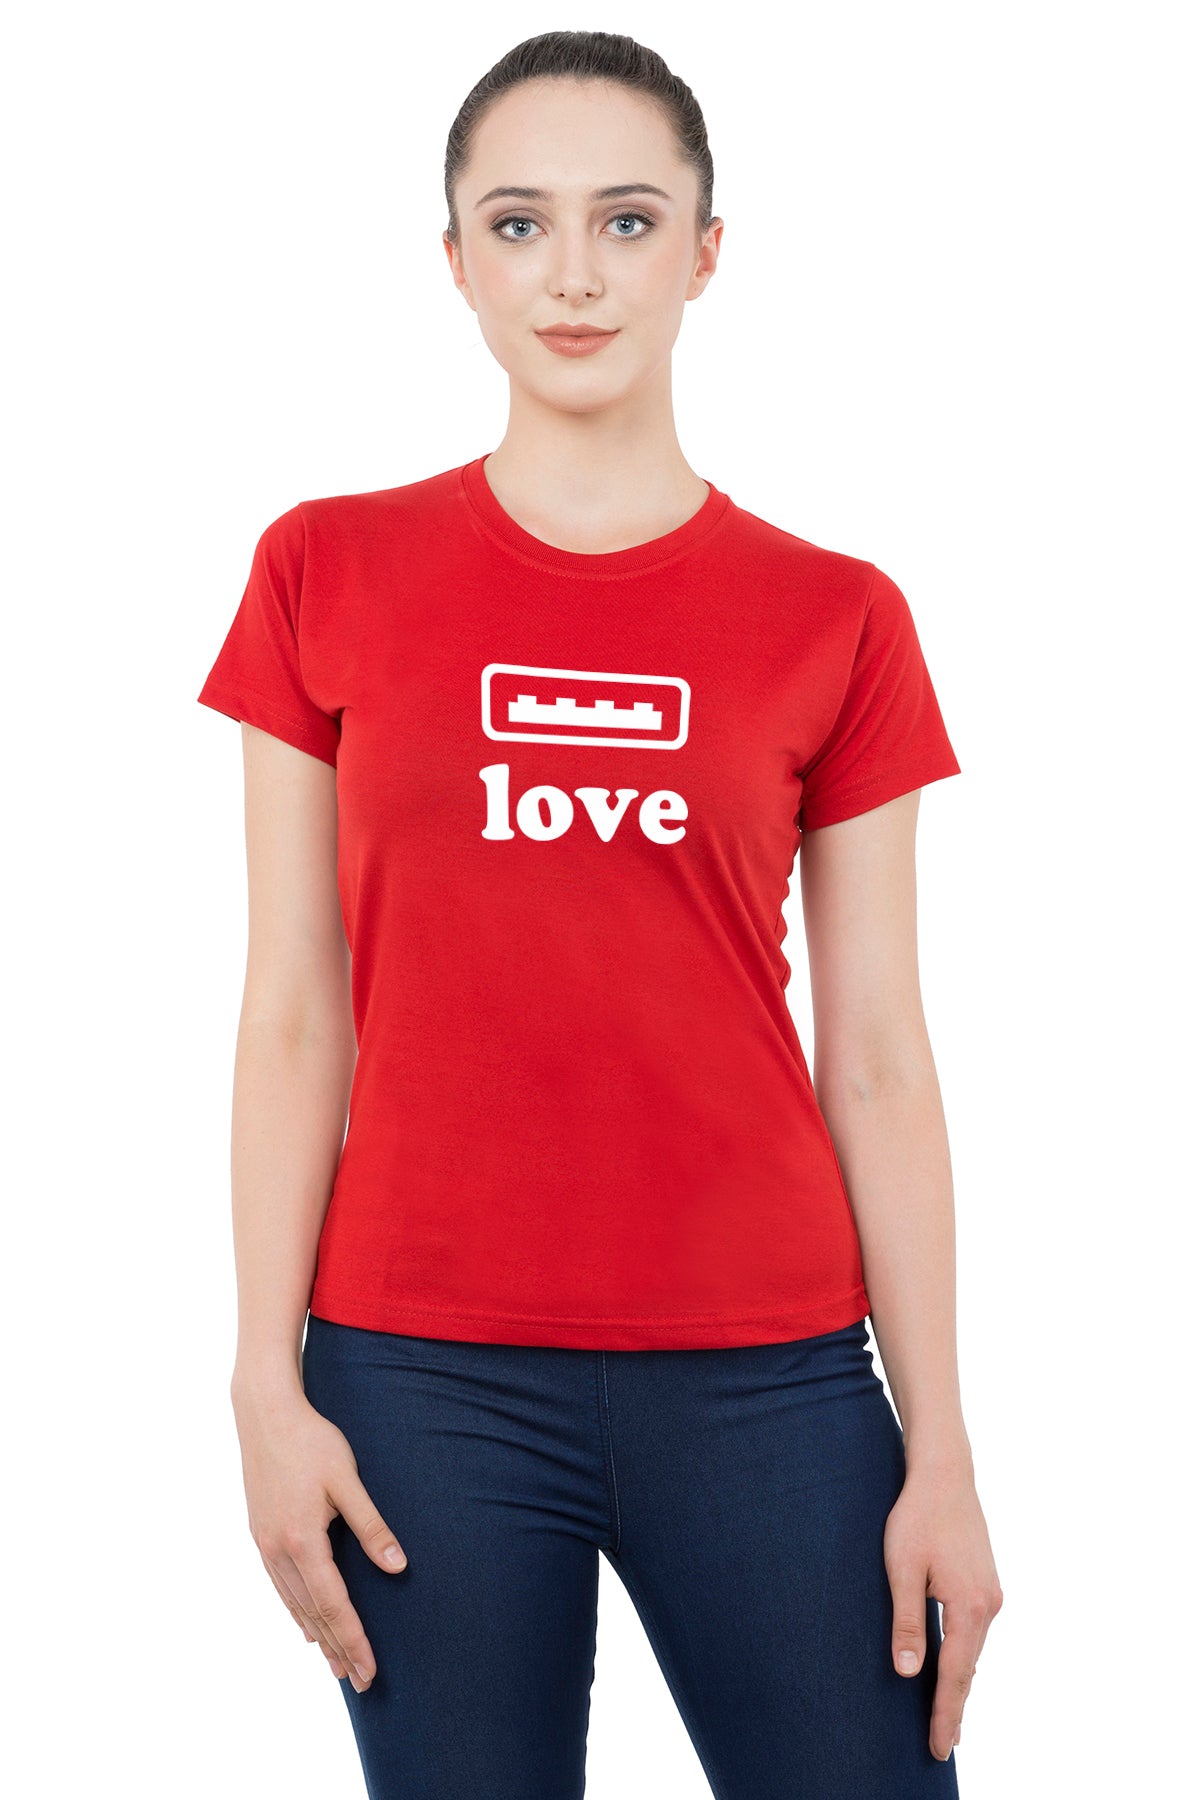 True Love matching Couple T shirts- Red